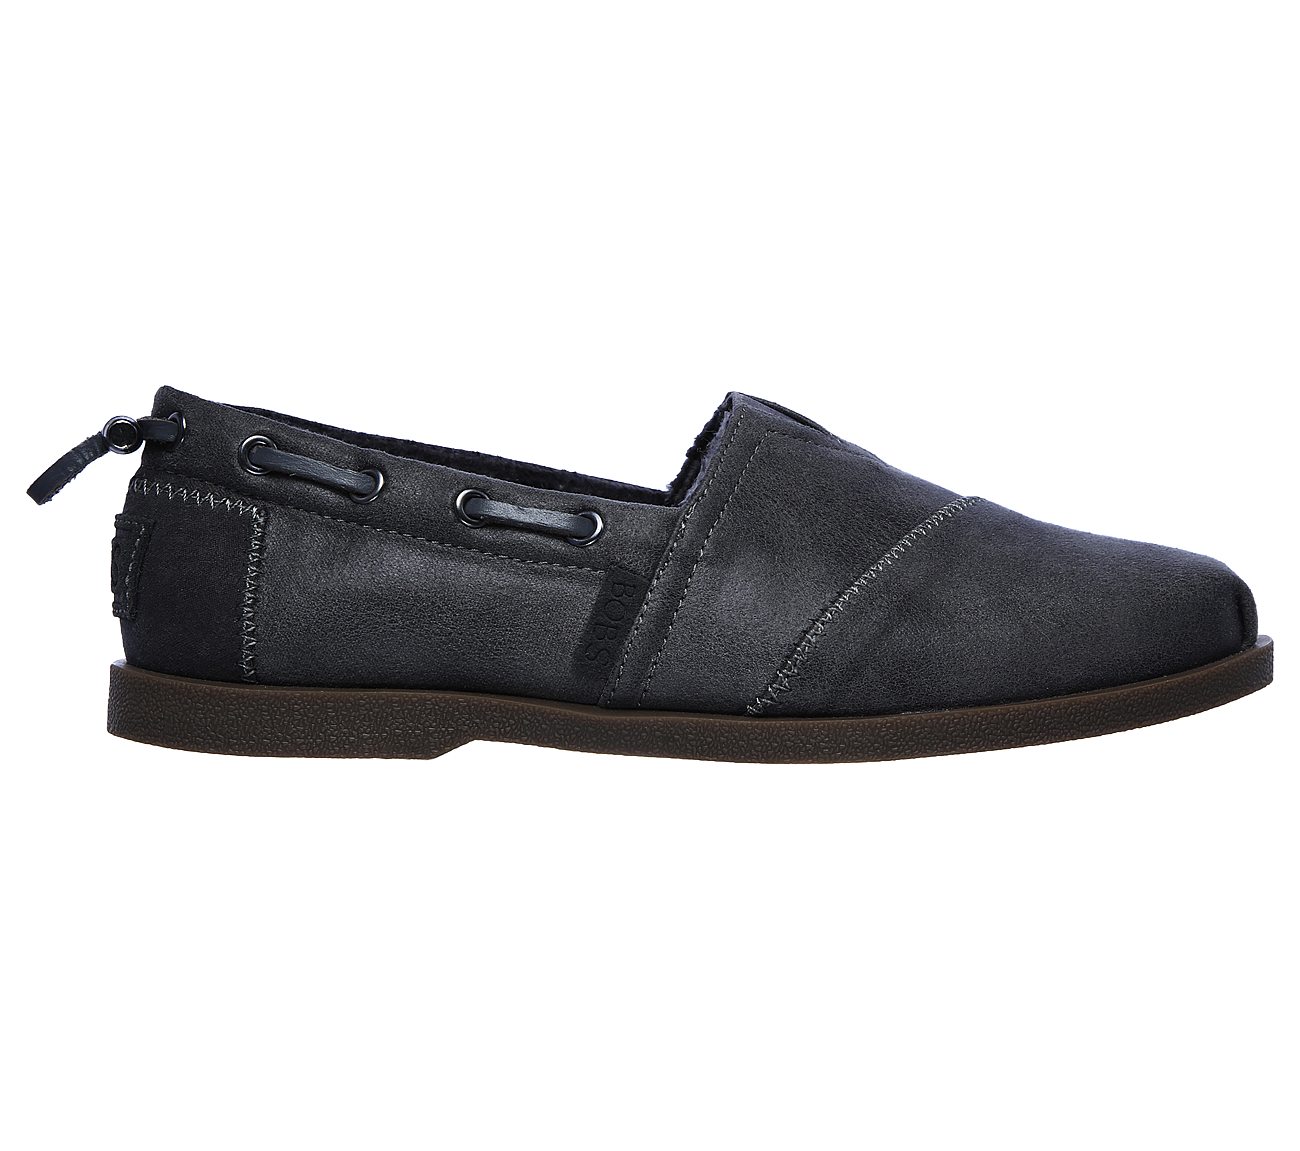 bobs black leather shoes